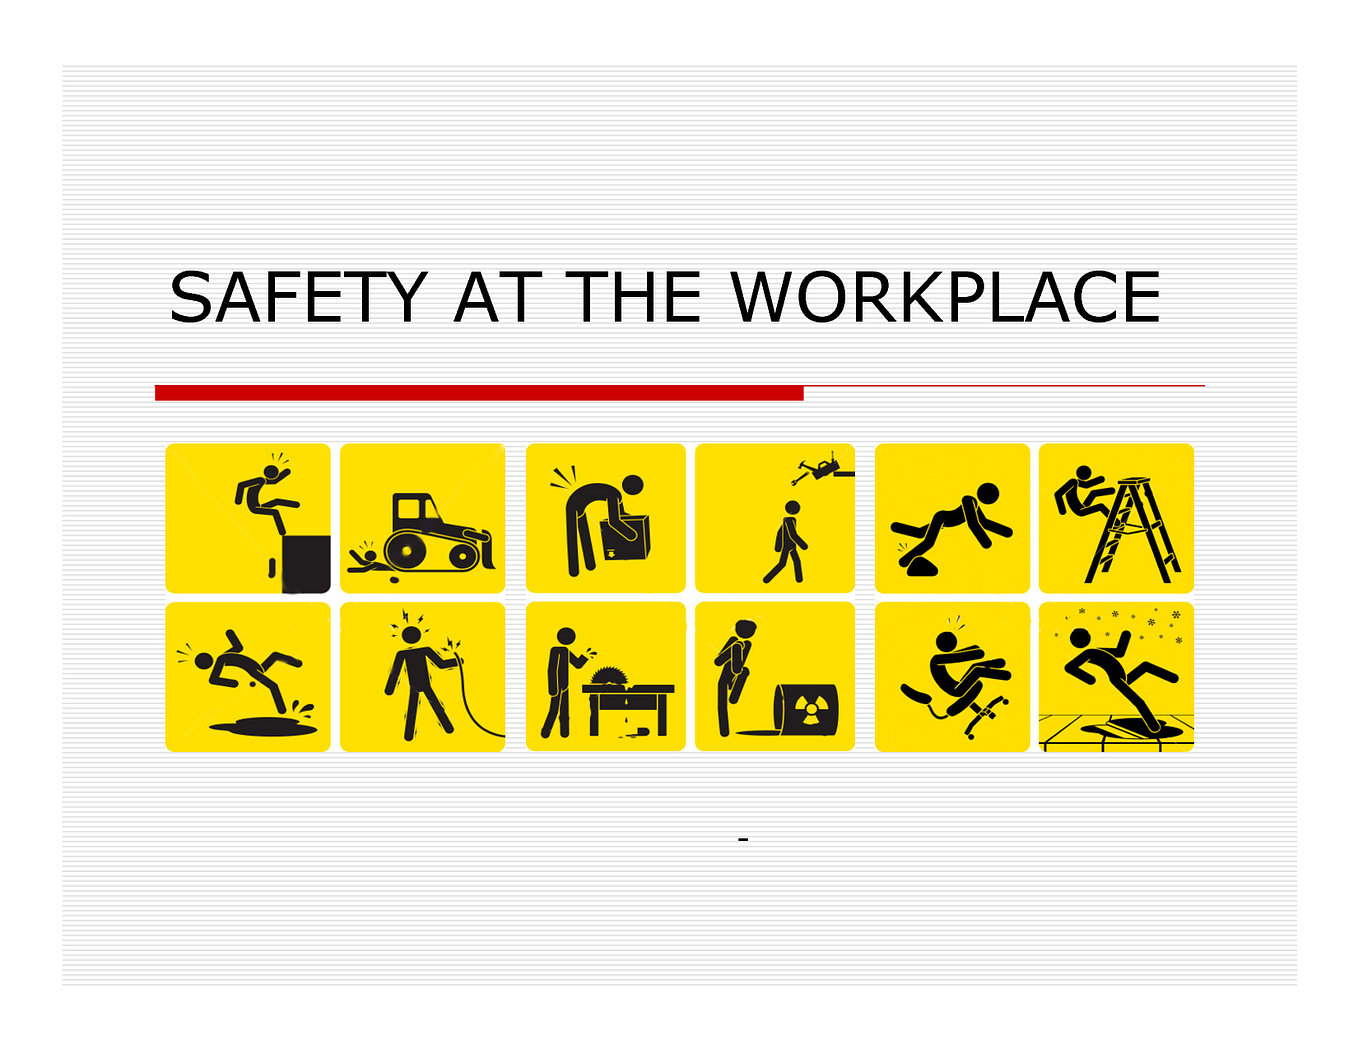  Algra Corporation Workplace Safety Rules Poster 18 X 24  Poster : Bruce Algra: Office Products